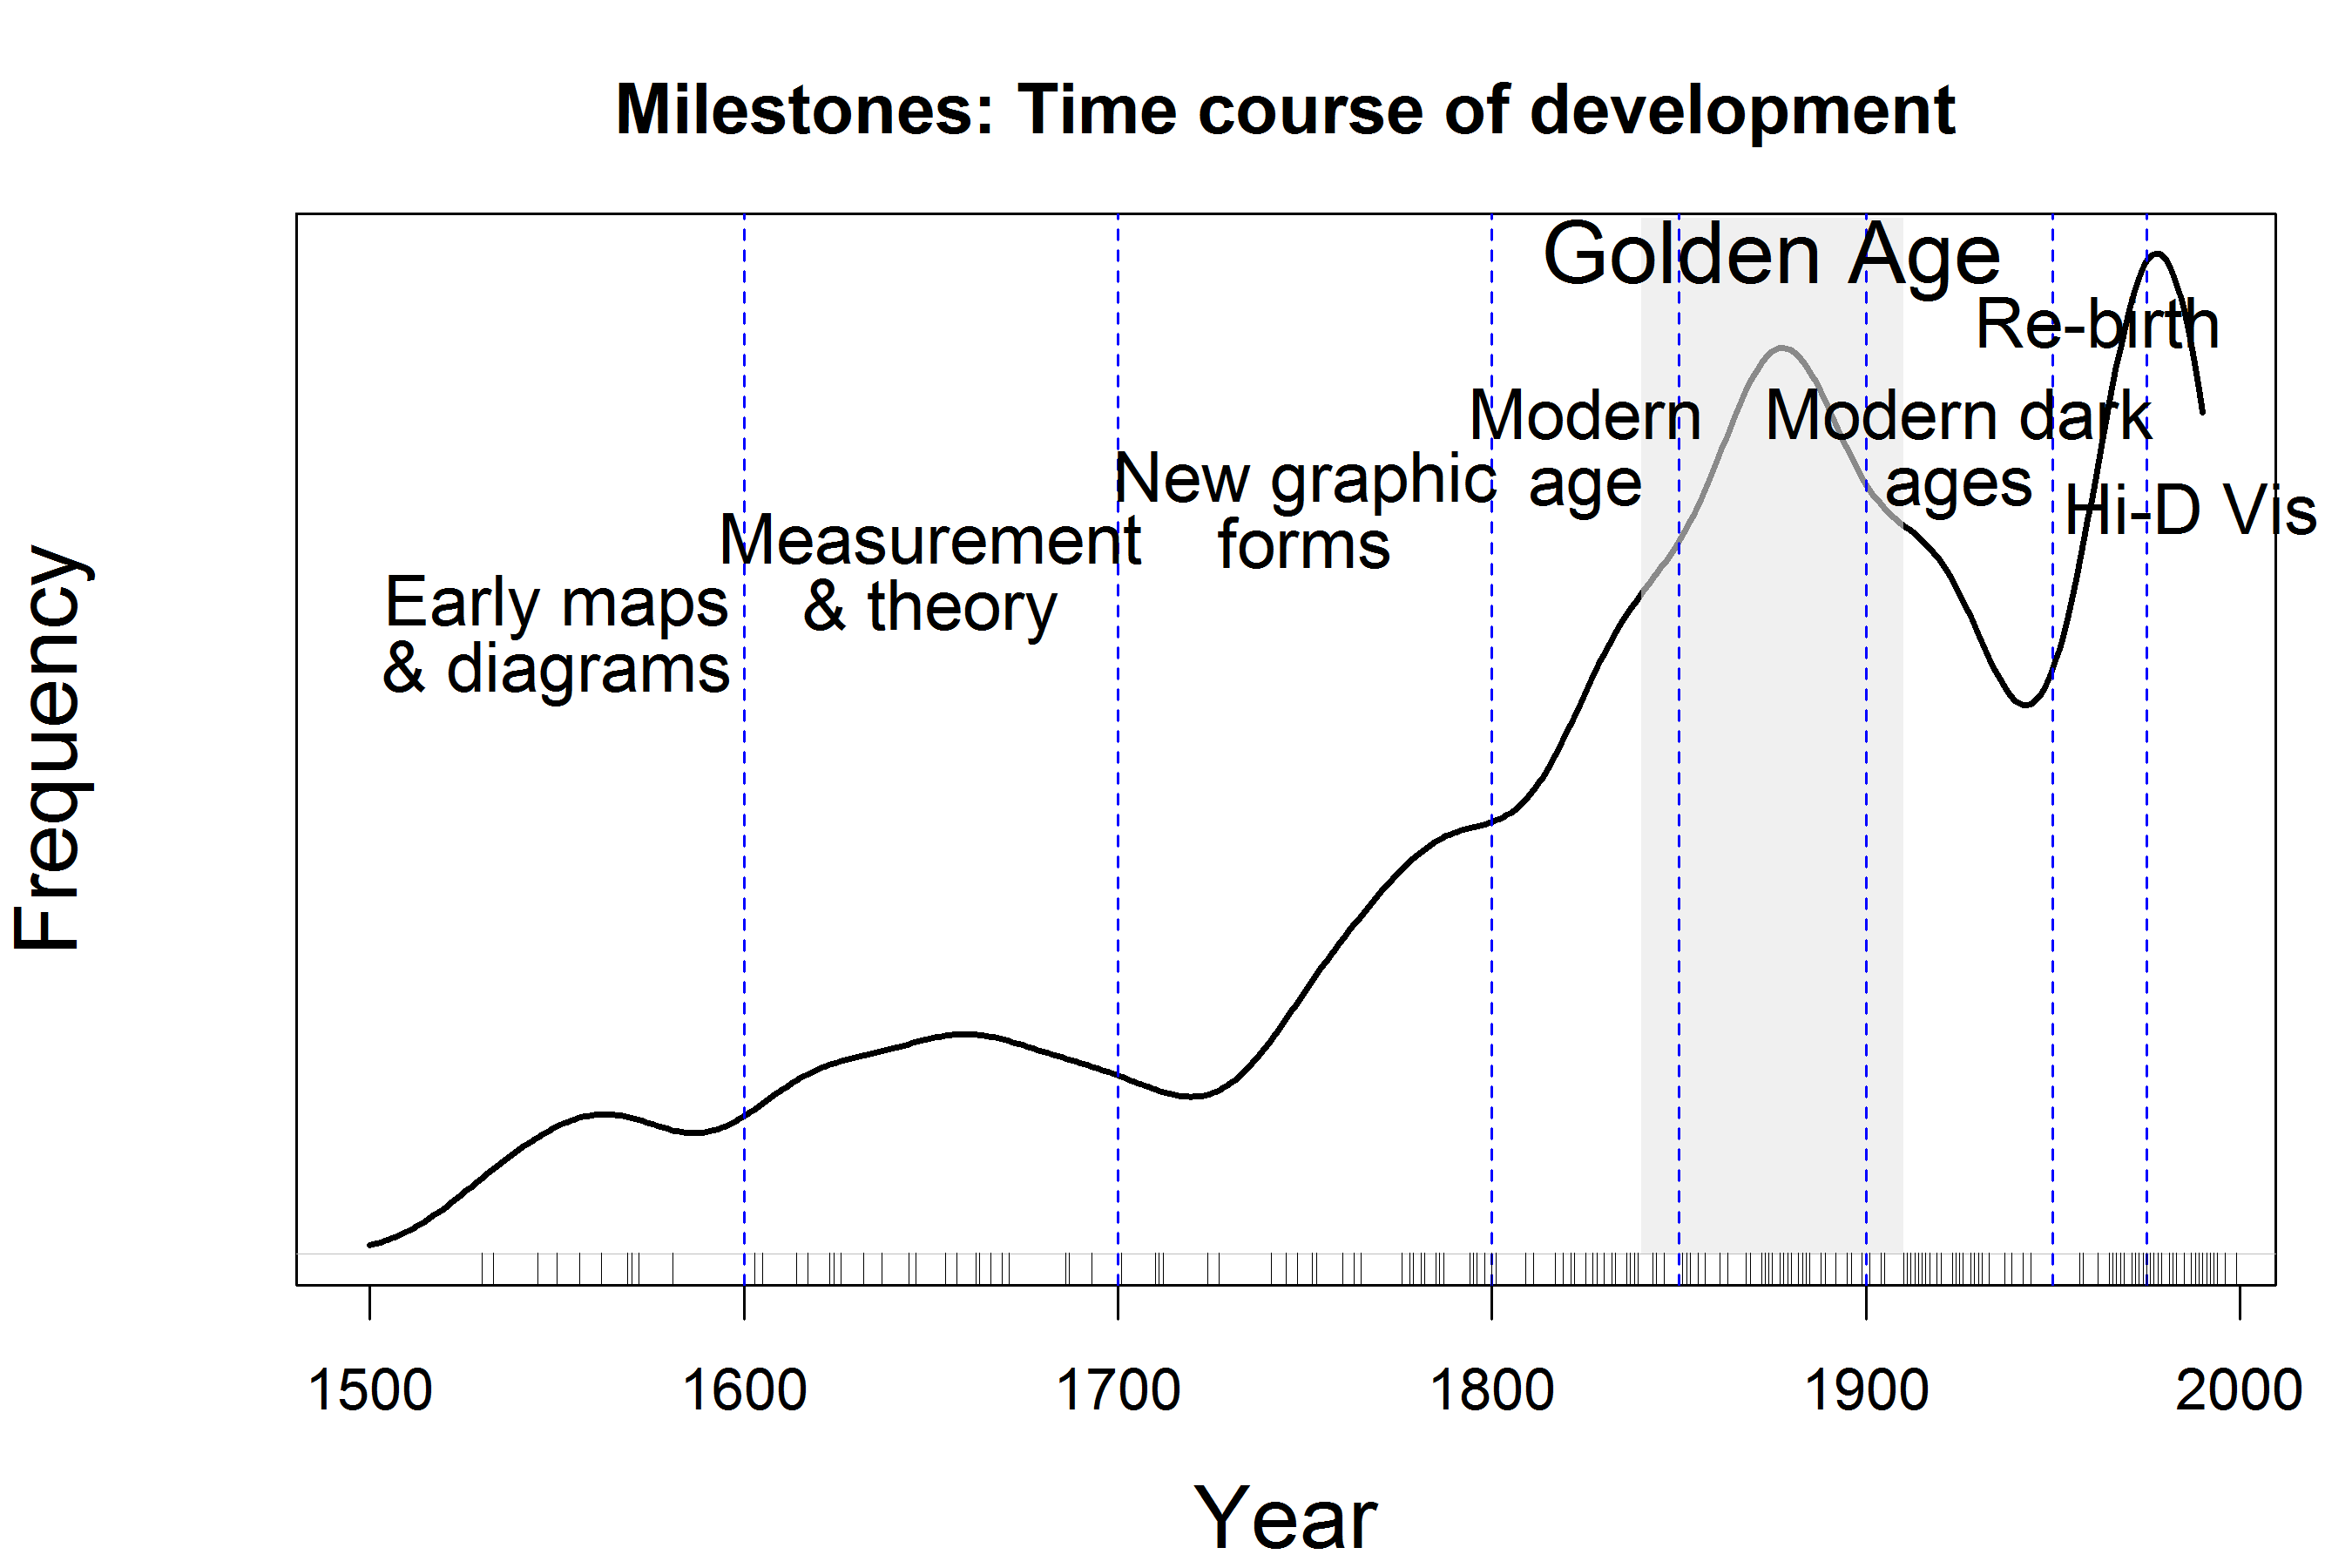 Milestones timeline: The time distribution of events considered milestones in the history of data visualization, shown by a rug plot and a density estimate.